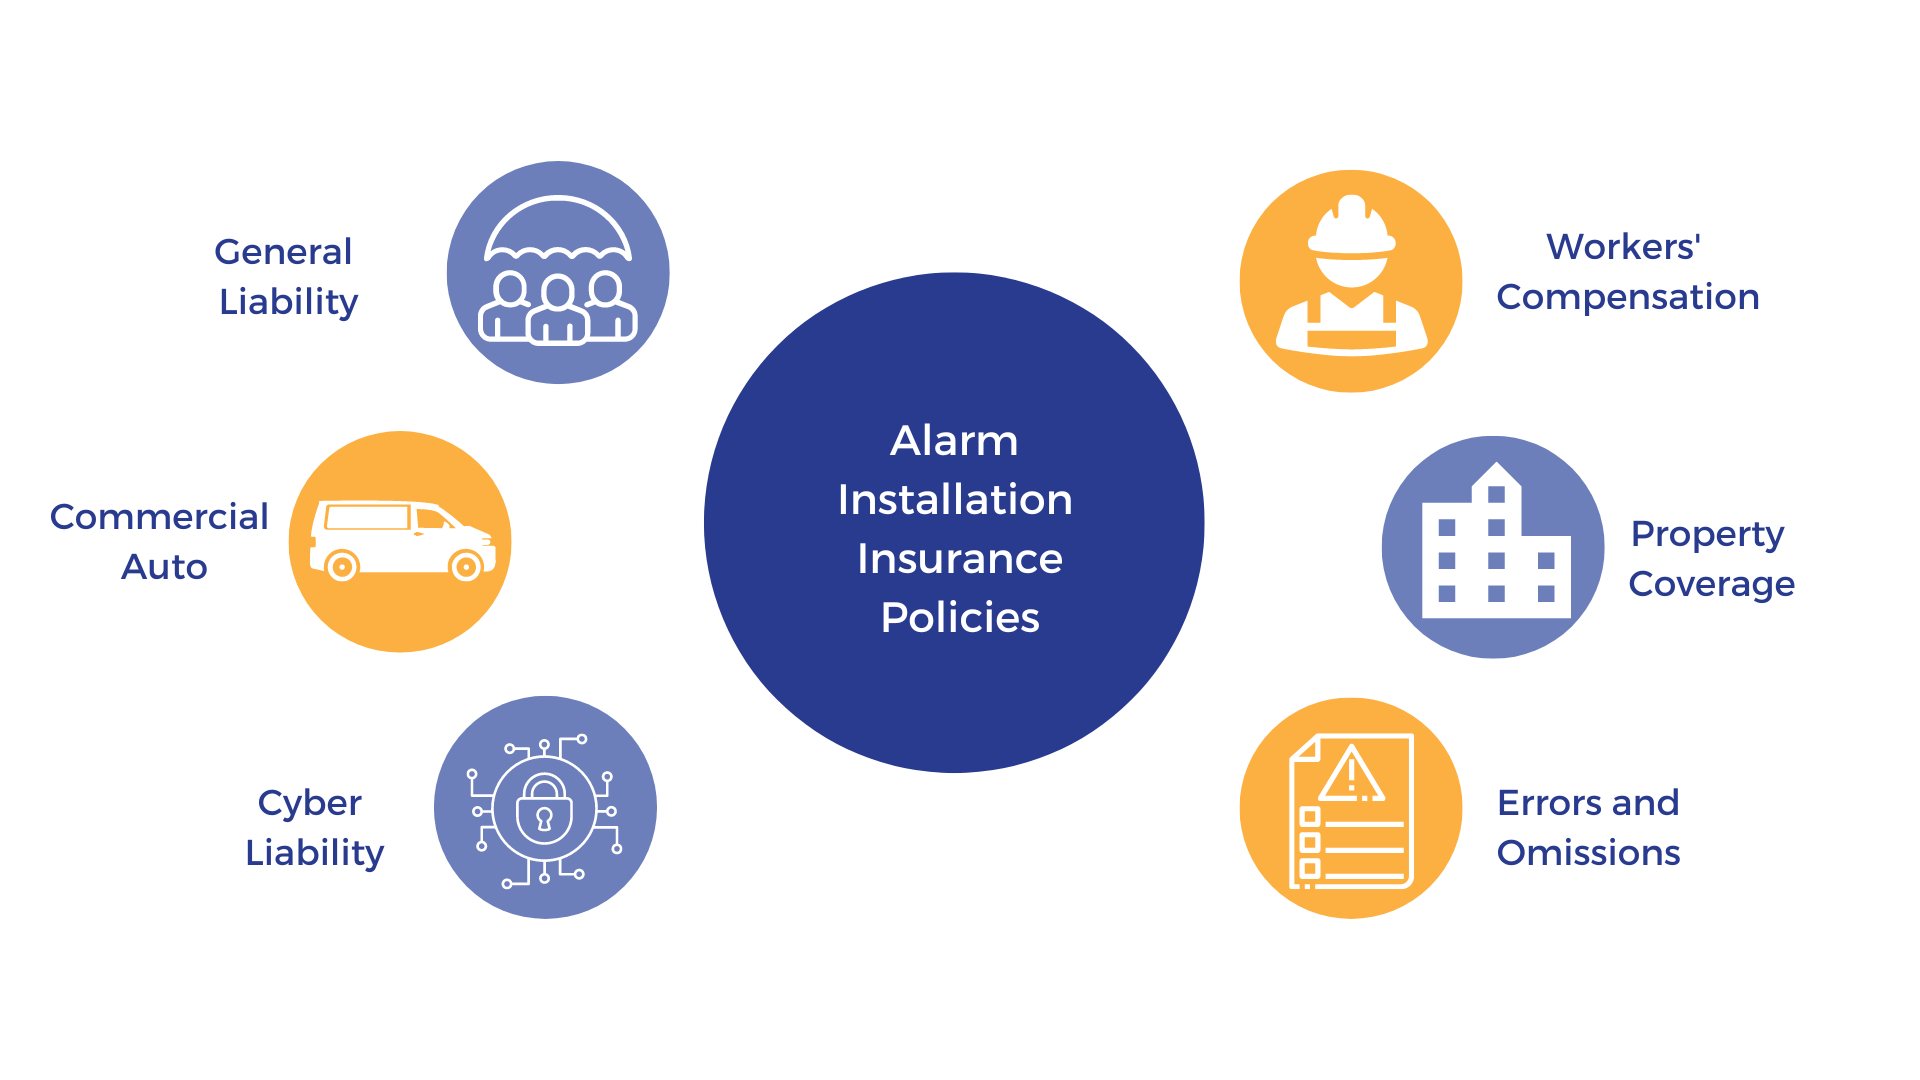 infographic describing the insurance policies an alarm installation contractor may need: general liability, commercial auto, cyber liability, workers compensation, property coverage, and errors and omissions